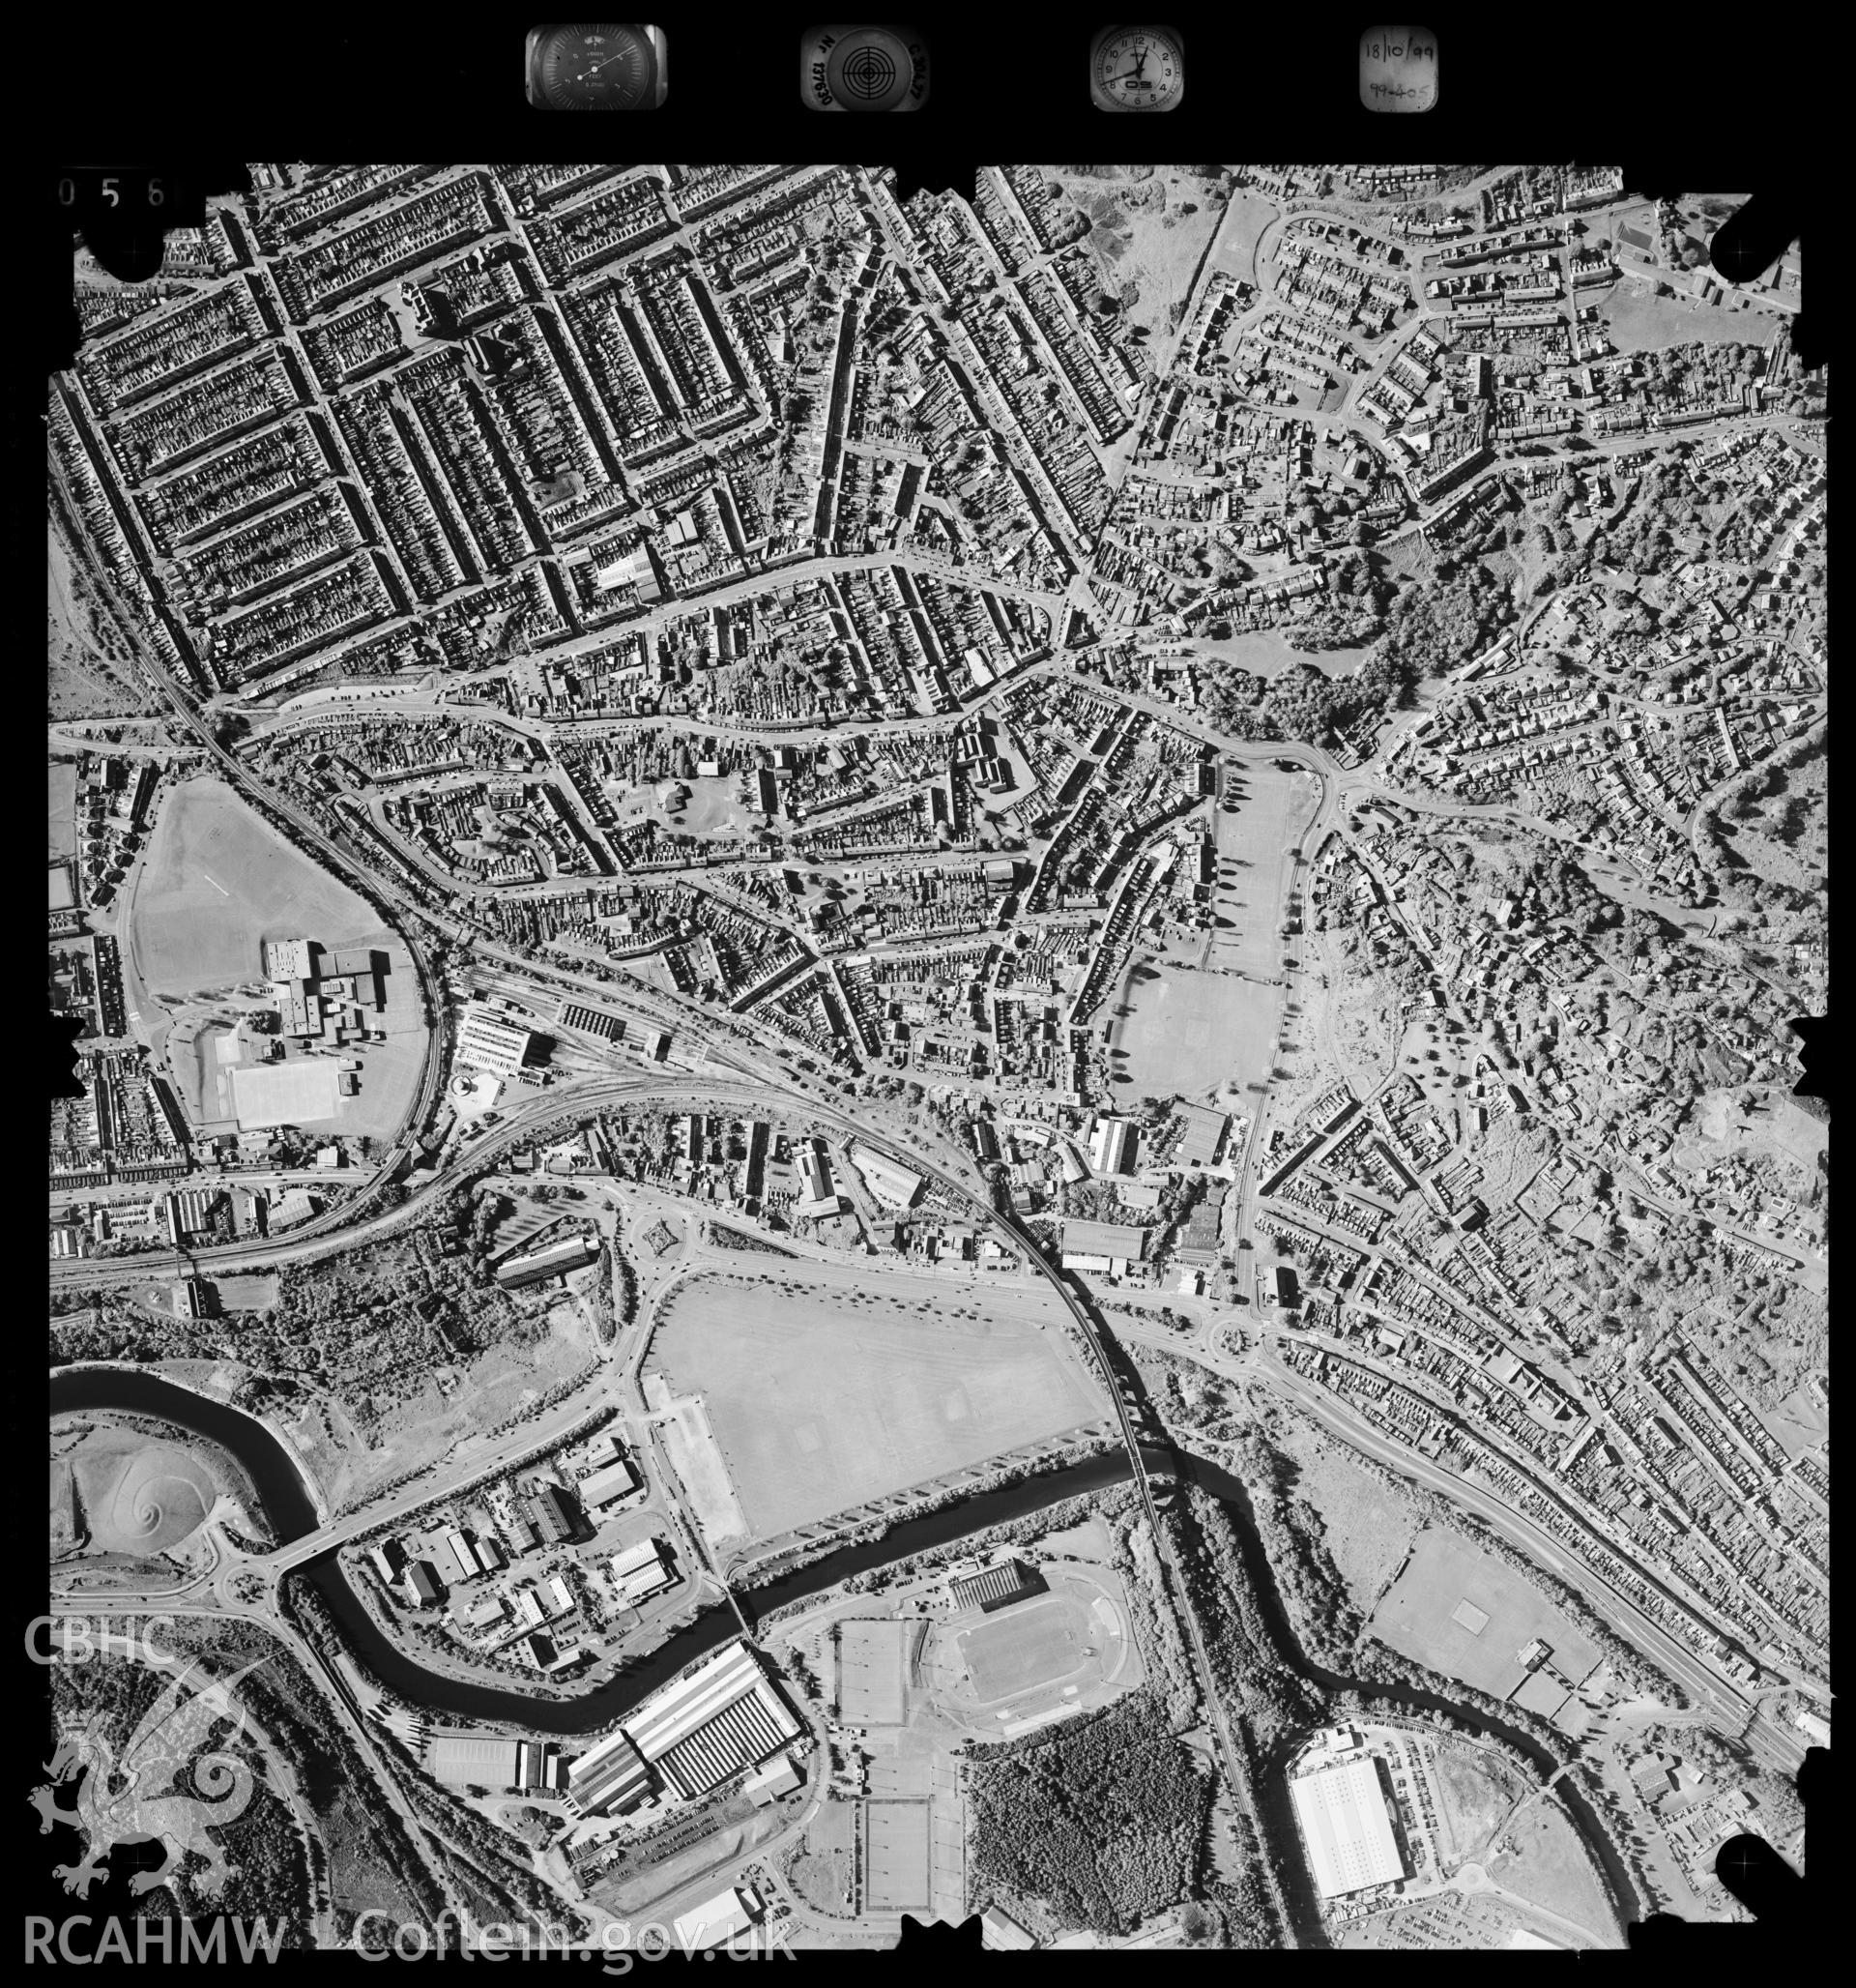 Digitized copy of an aerial photograph showing the Manselton area, taken by Ordnance Survey, 199.